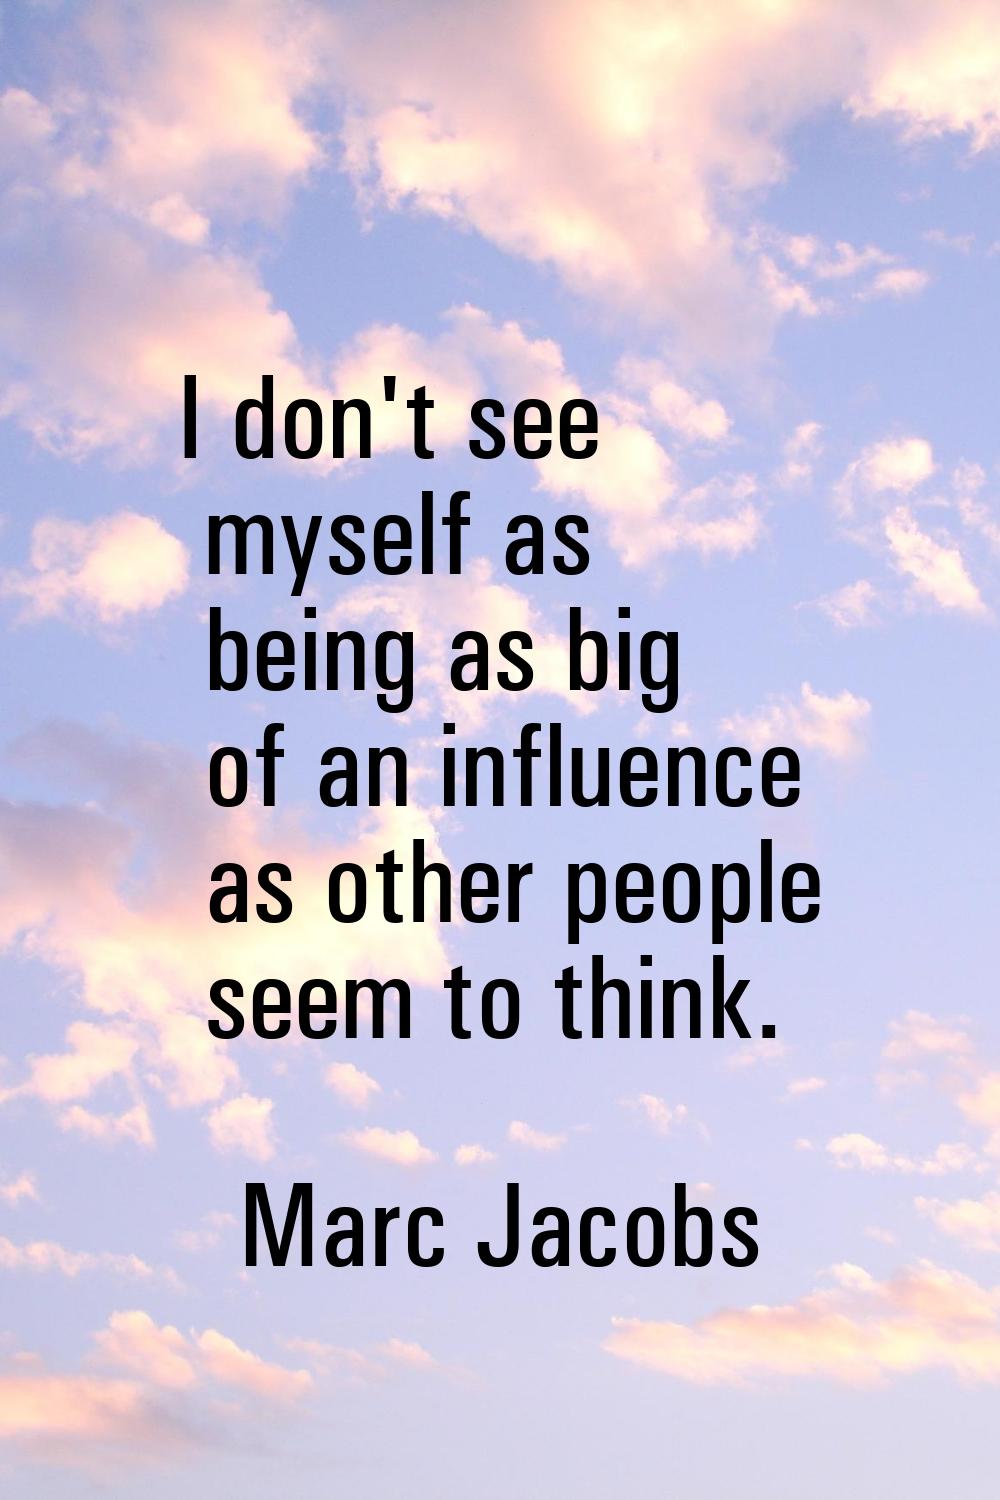 I don't see myself as being as big of an influence as other people seem to think.